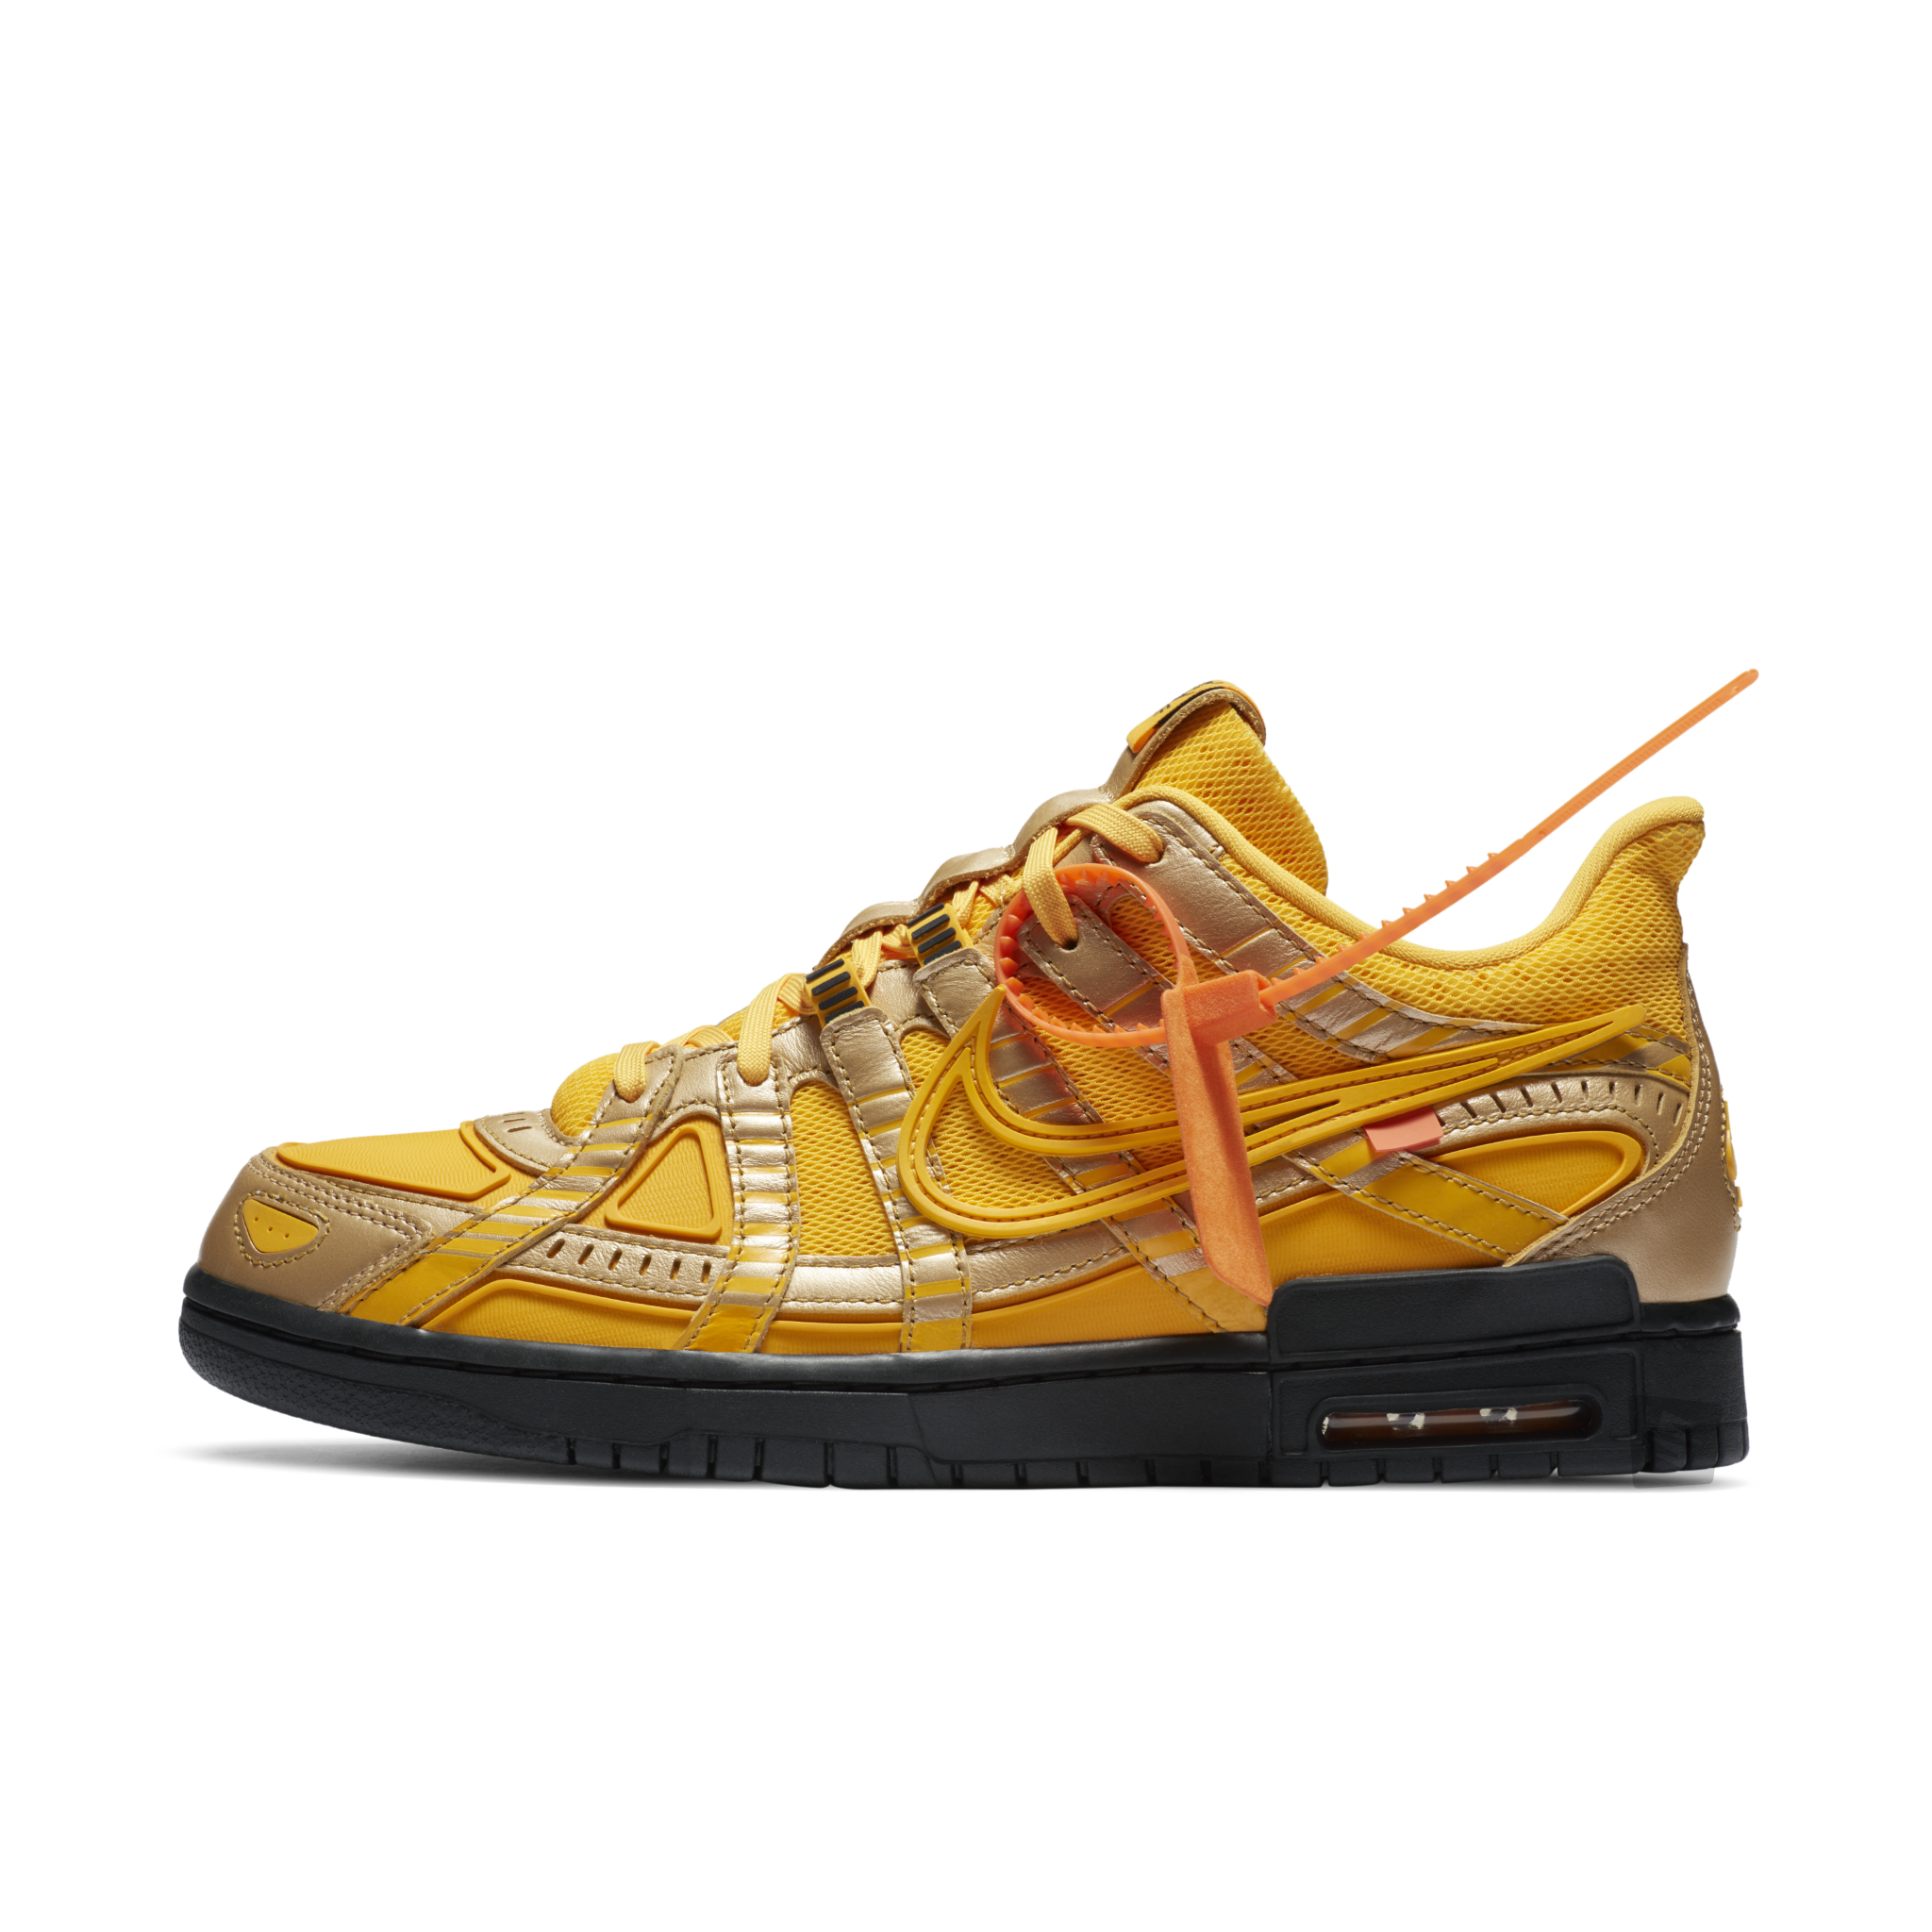 Nike X Off White Air Rubber Dunk University Gold Sneakin